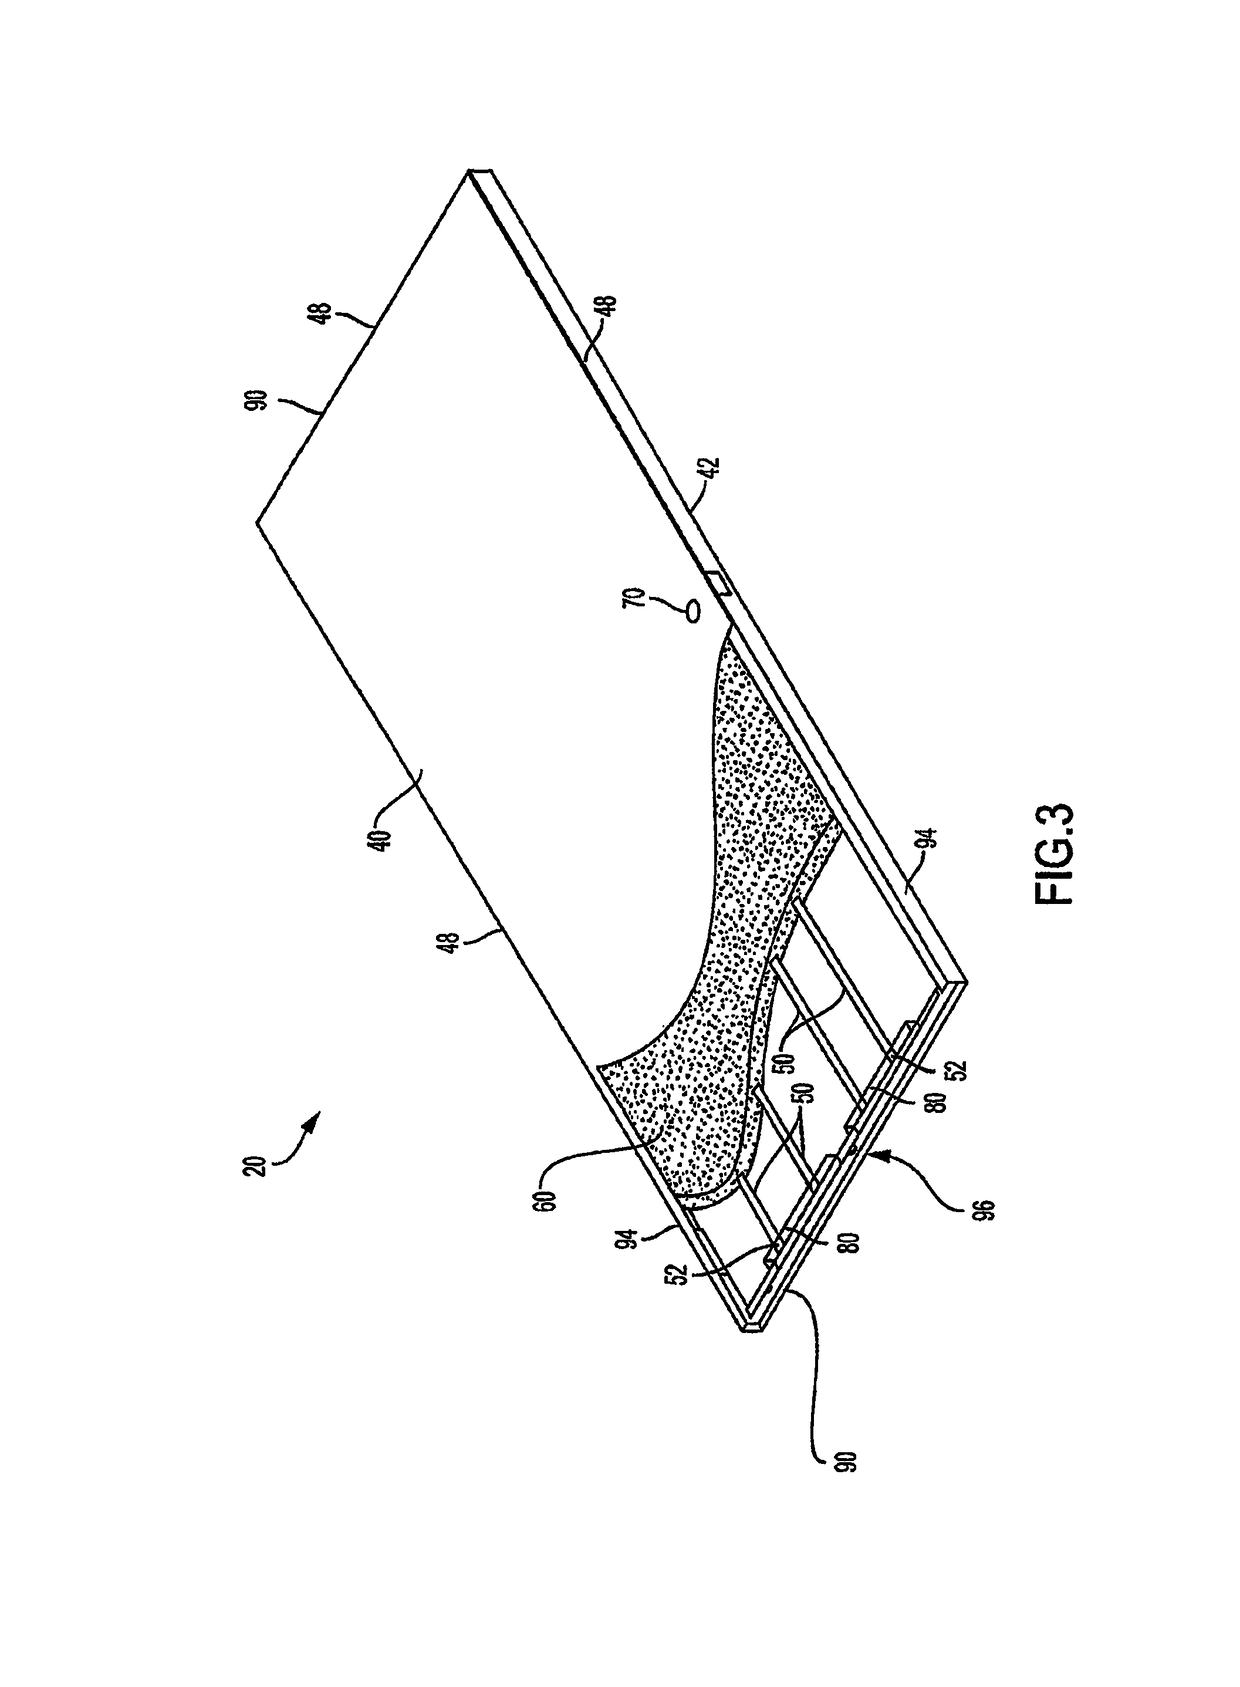 Insulated fiber reinforced door panel and method of making same